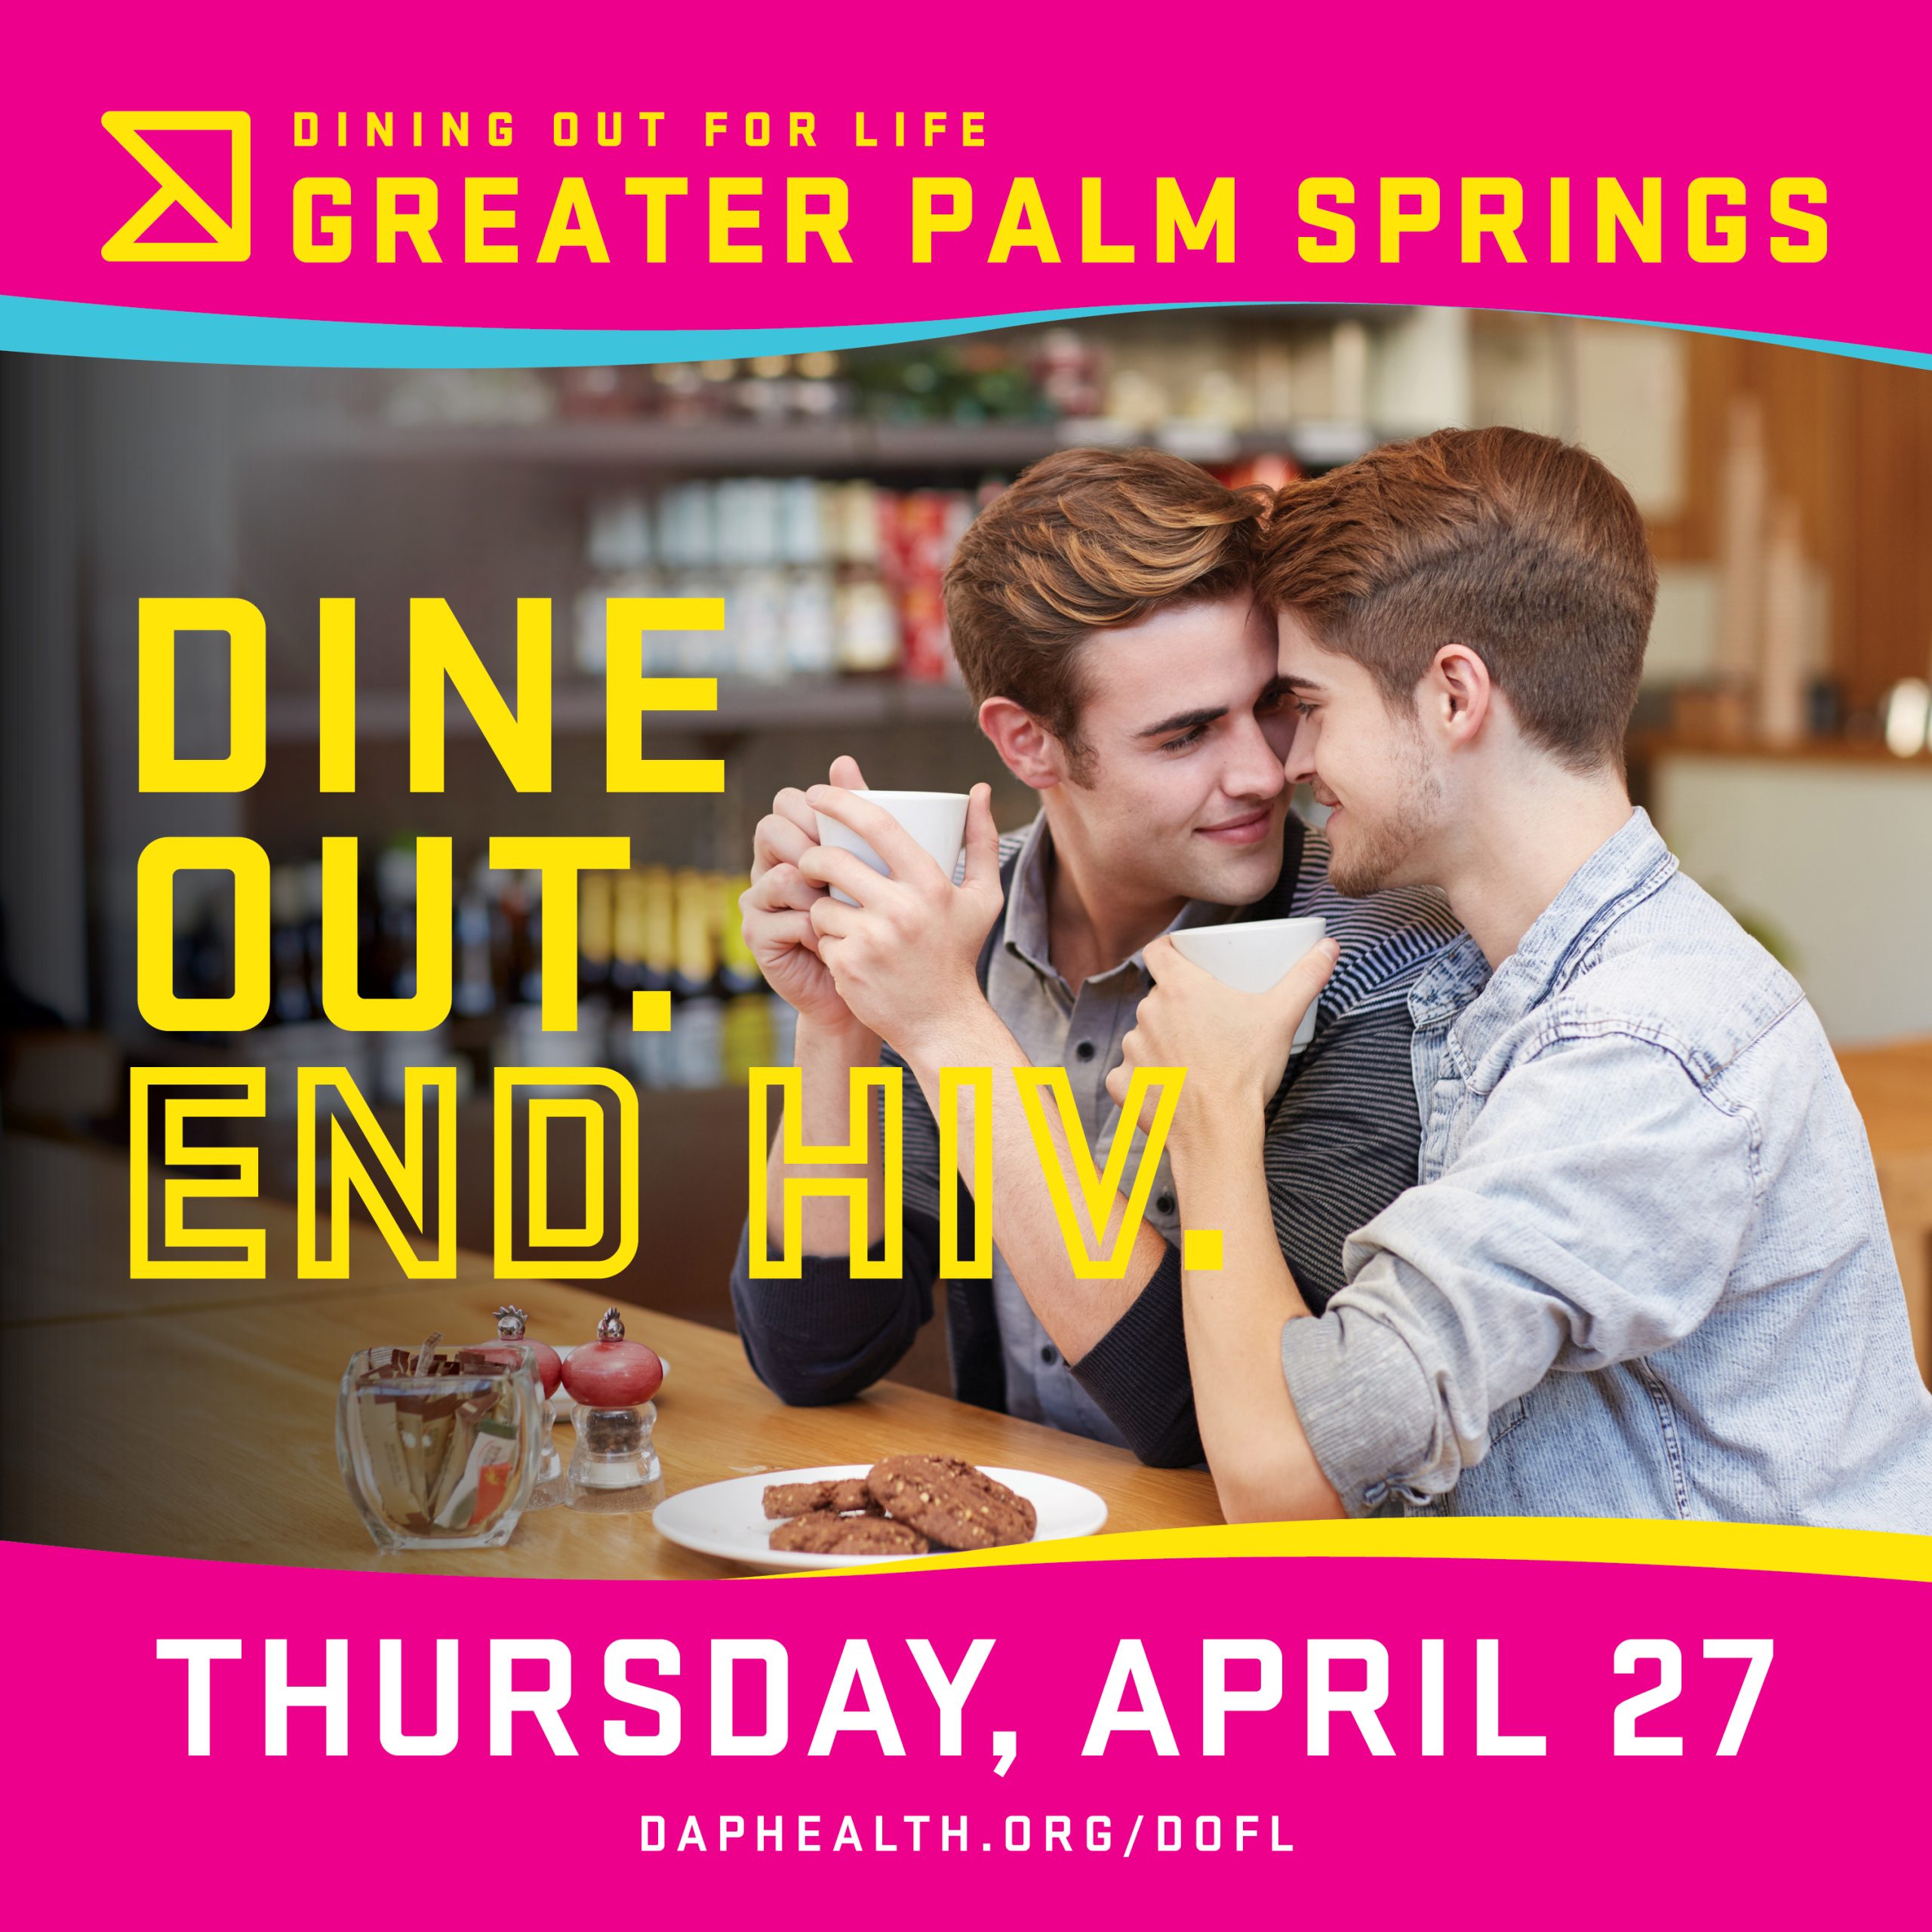 Dine Out For Life to End HIV on April 27